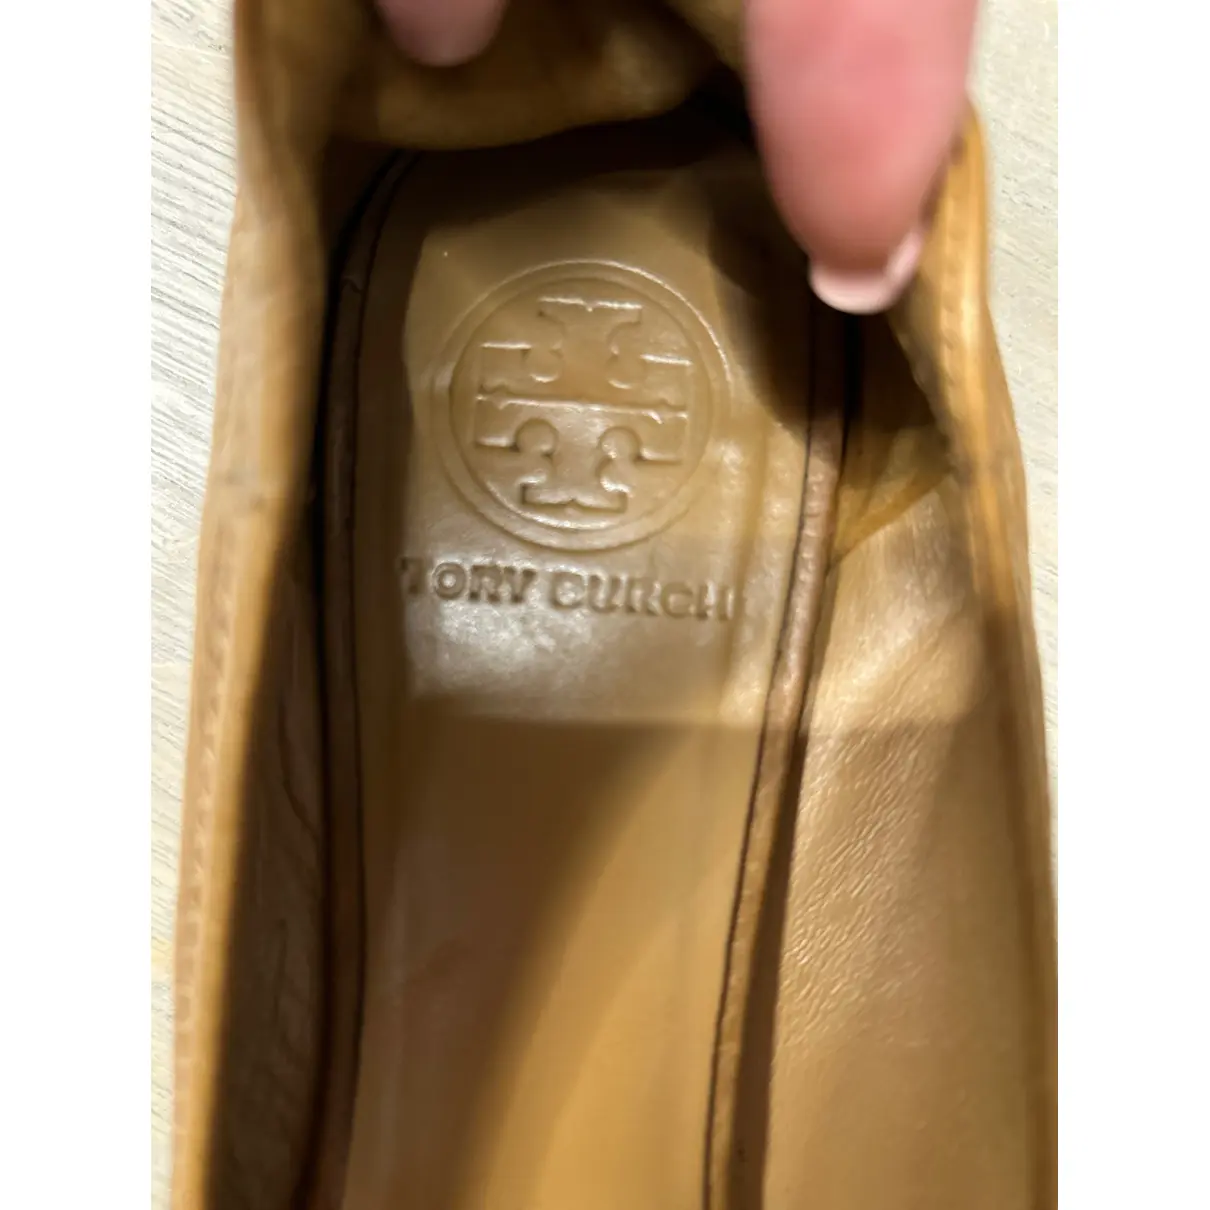 Buy Tory Burch Leather ballet flats online